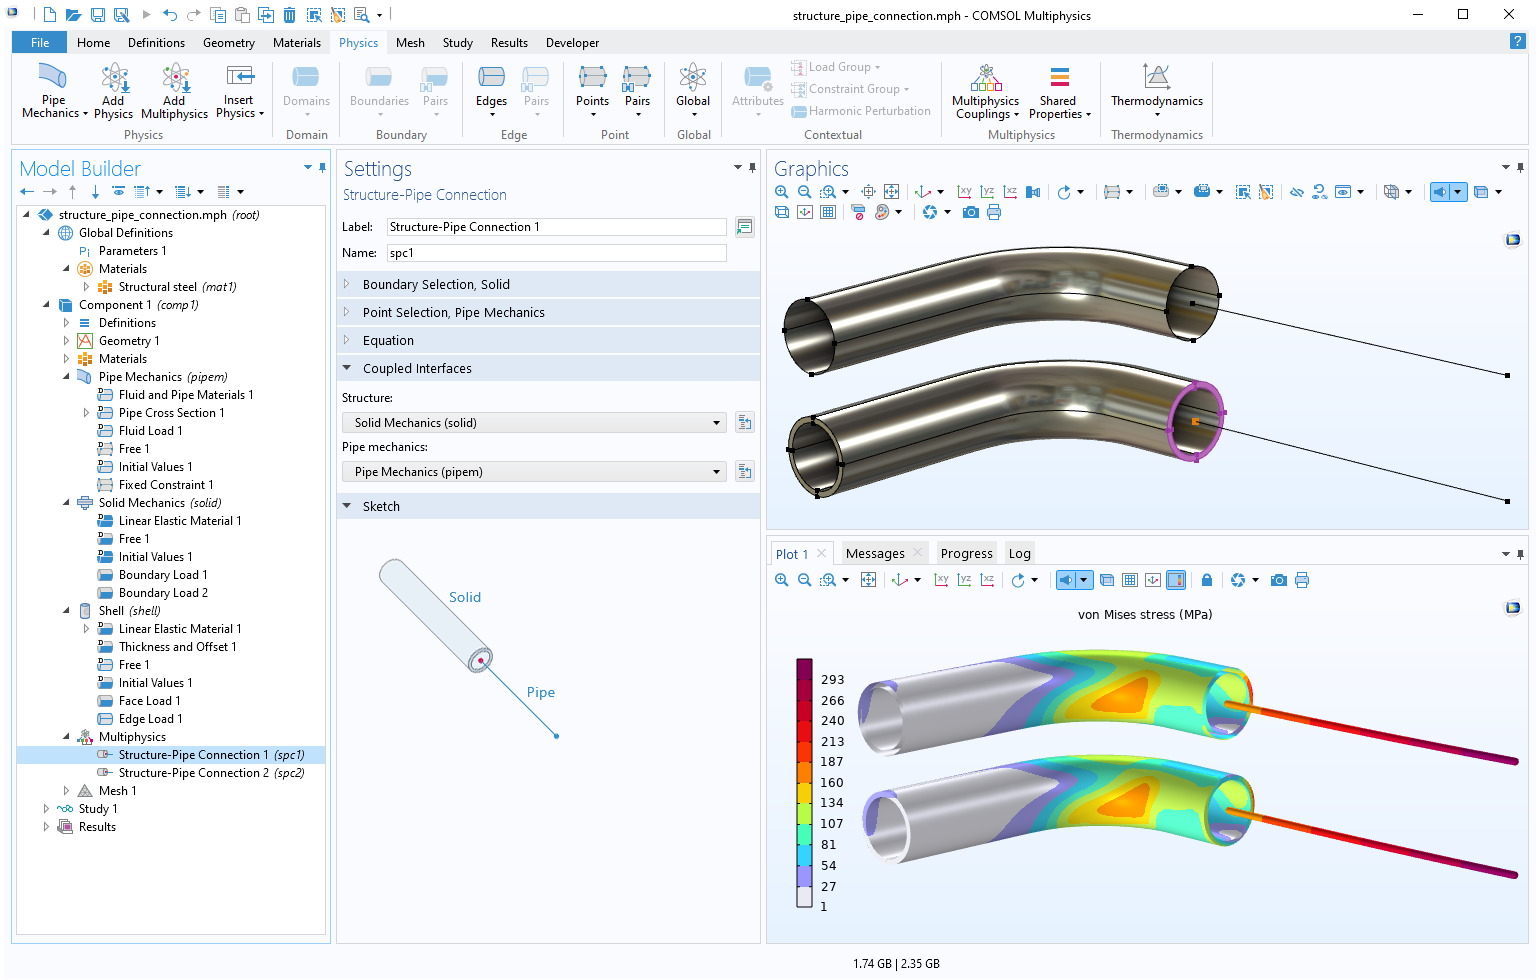 The COMSOL Multiphysics UI showing the Model Builder with the Structure-Pipe Connection node selected, the corresponding Settings window, and a structure pipe connection model in both the Graphics and Plot windows.